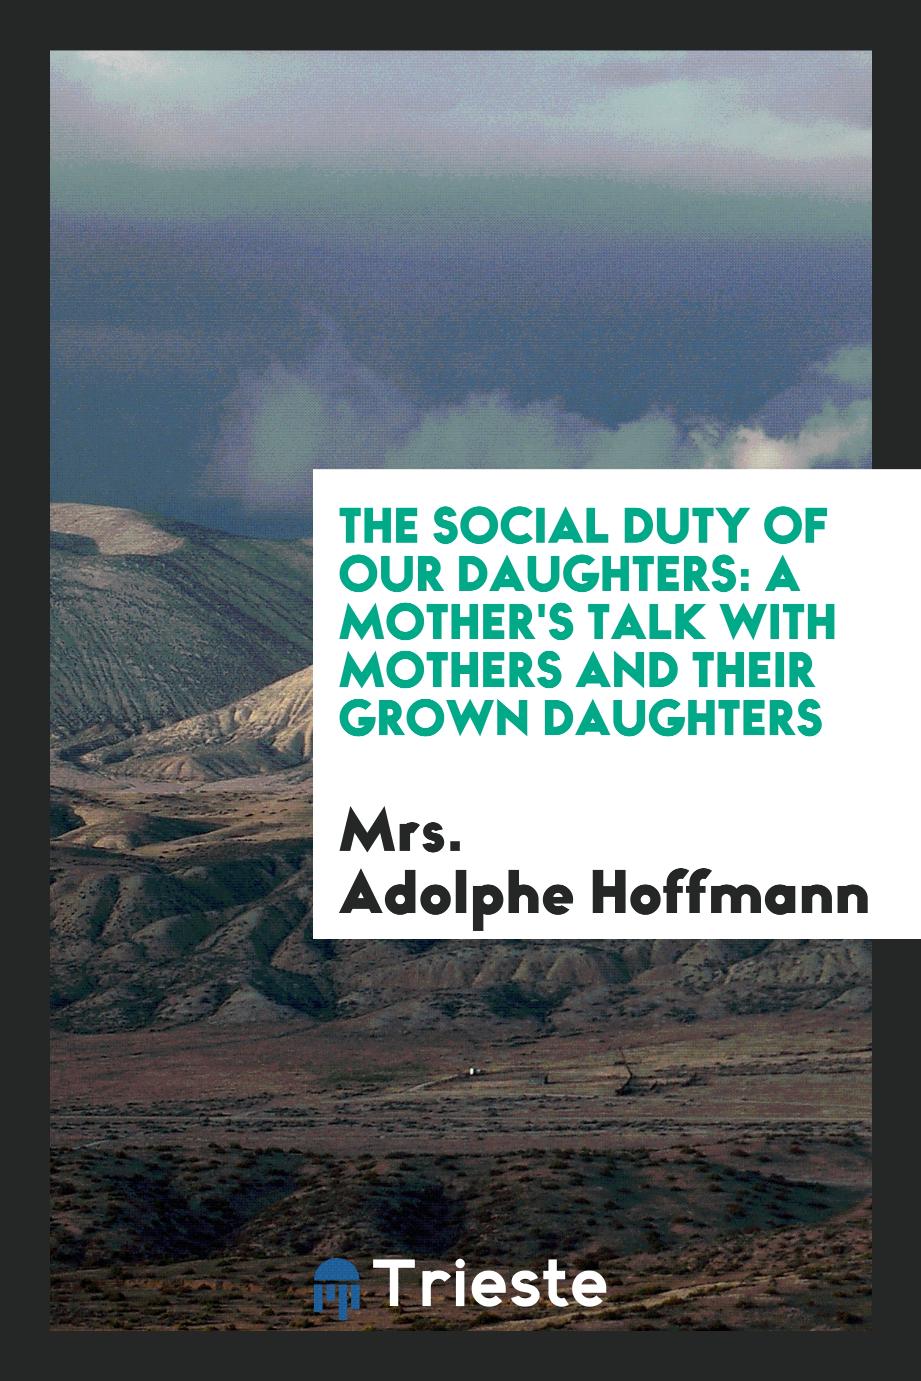 The Social Duty of Our Daughters: A Mother's Talk with Mothers and Their Grown Daughters